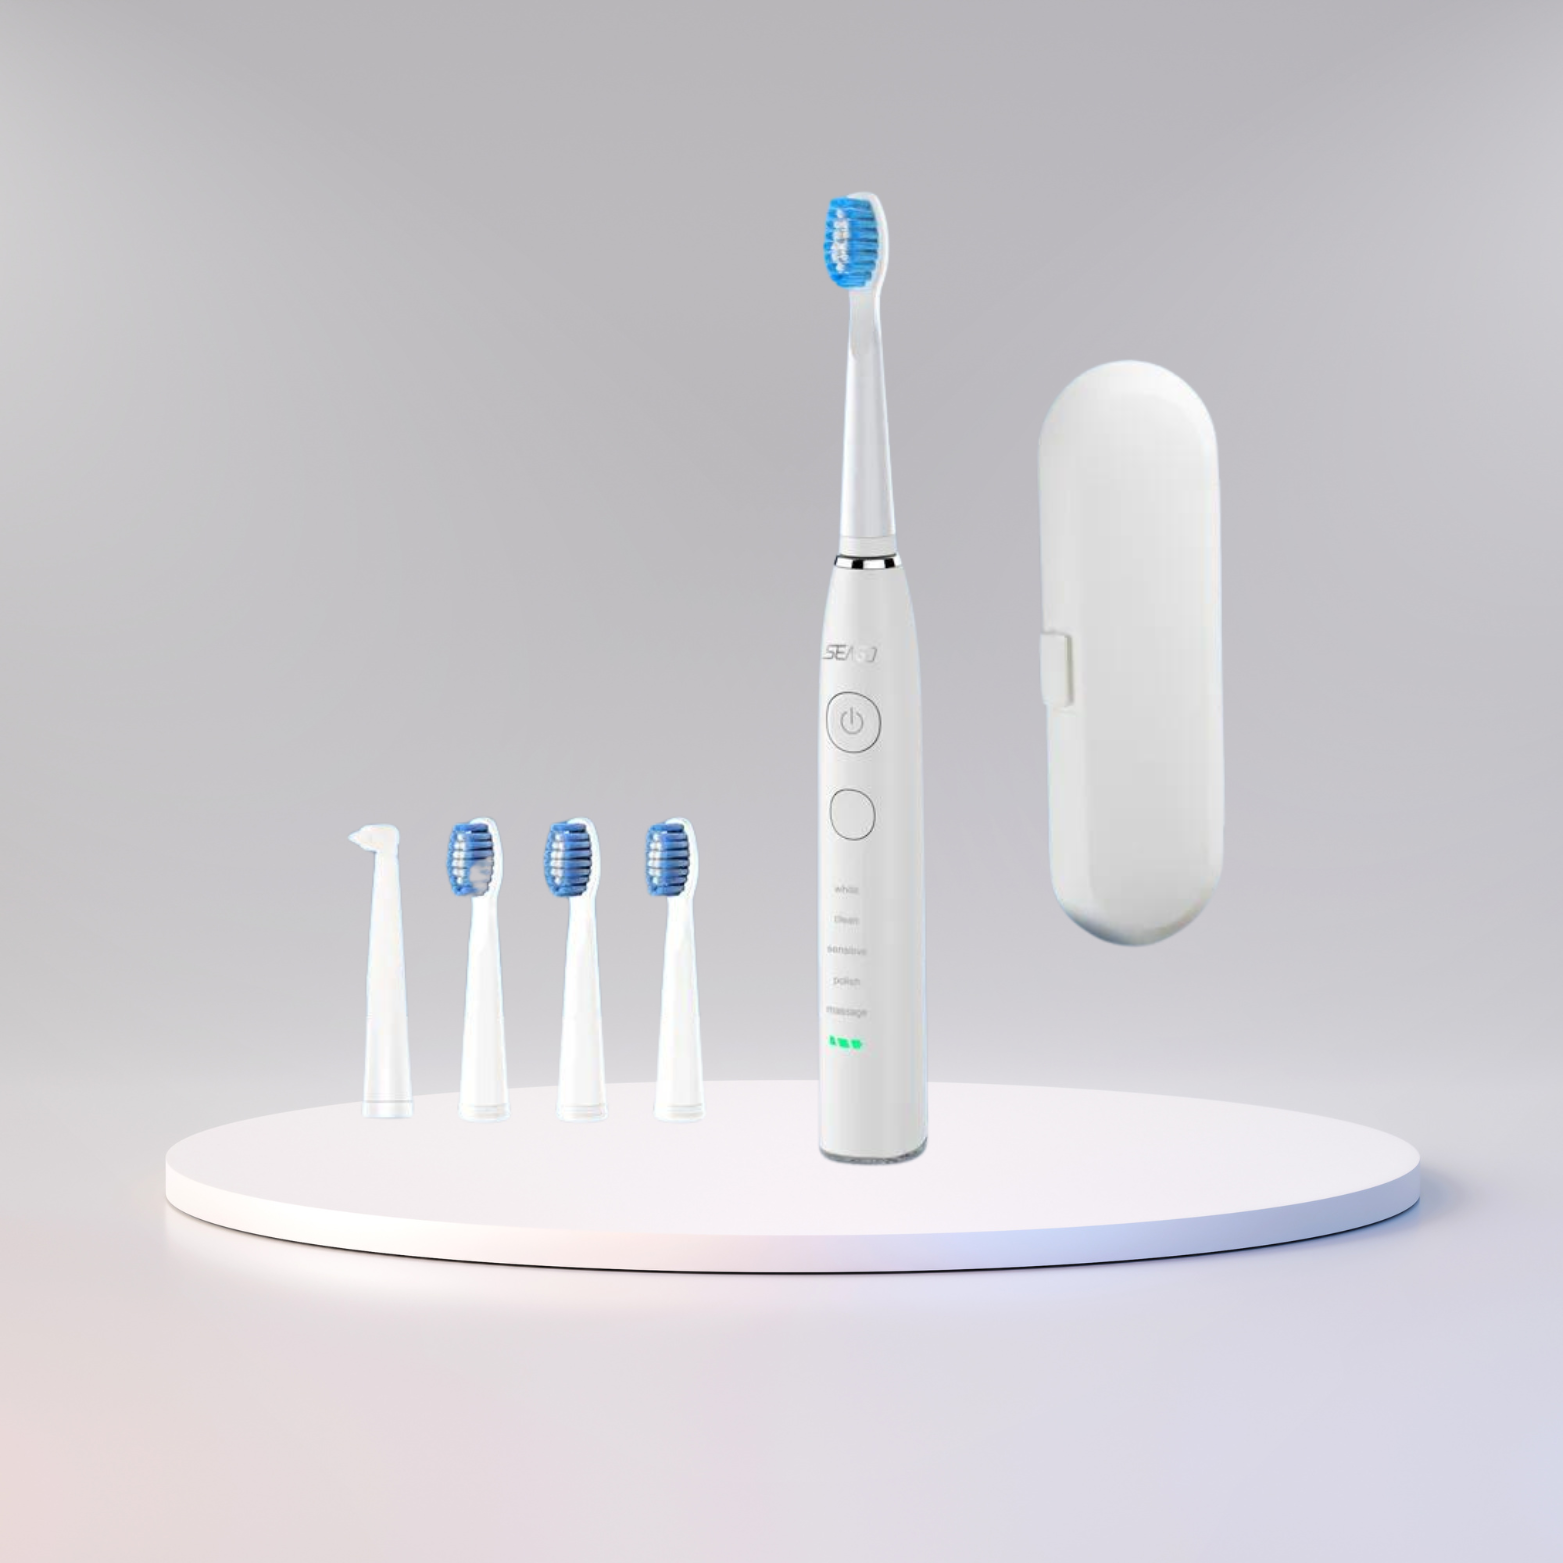 Seago Electric Sonic Toothbrush USB Rechargeable personal care Care Line CARELINE SHOP LLC